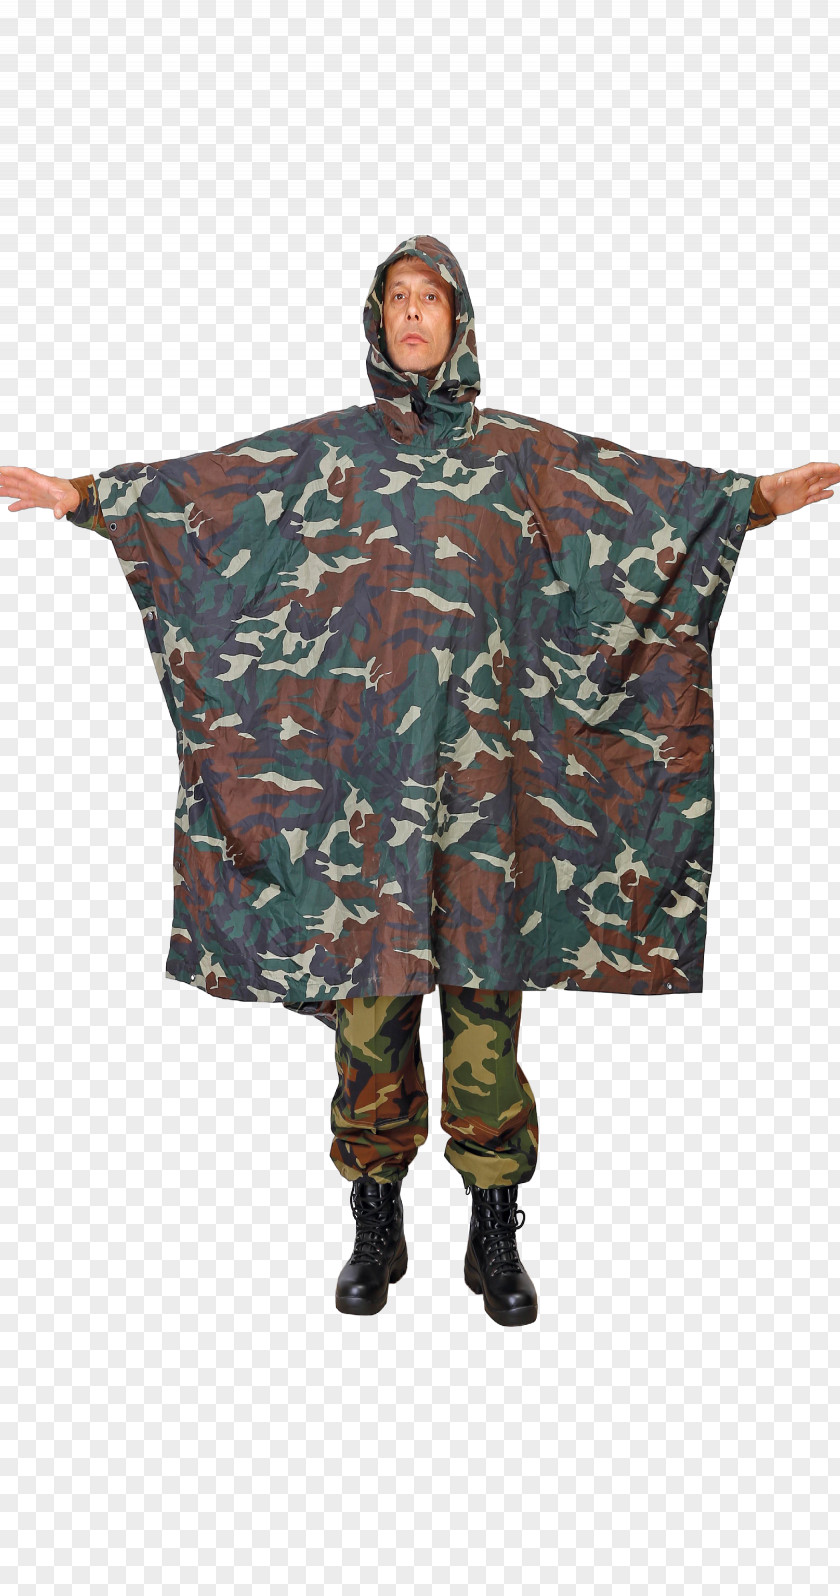 Military Camouflage Uniform Outerwear PNG